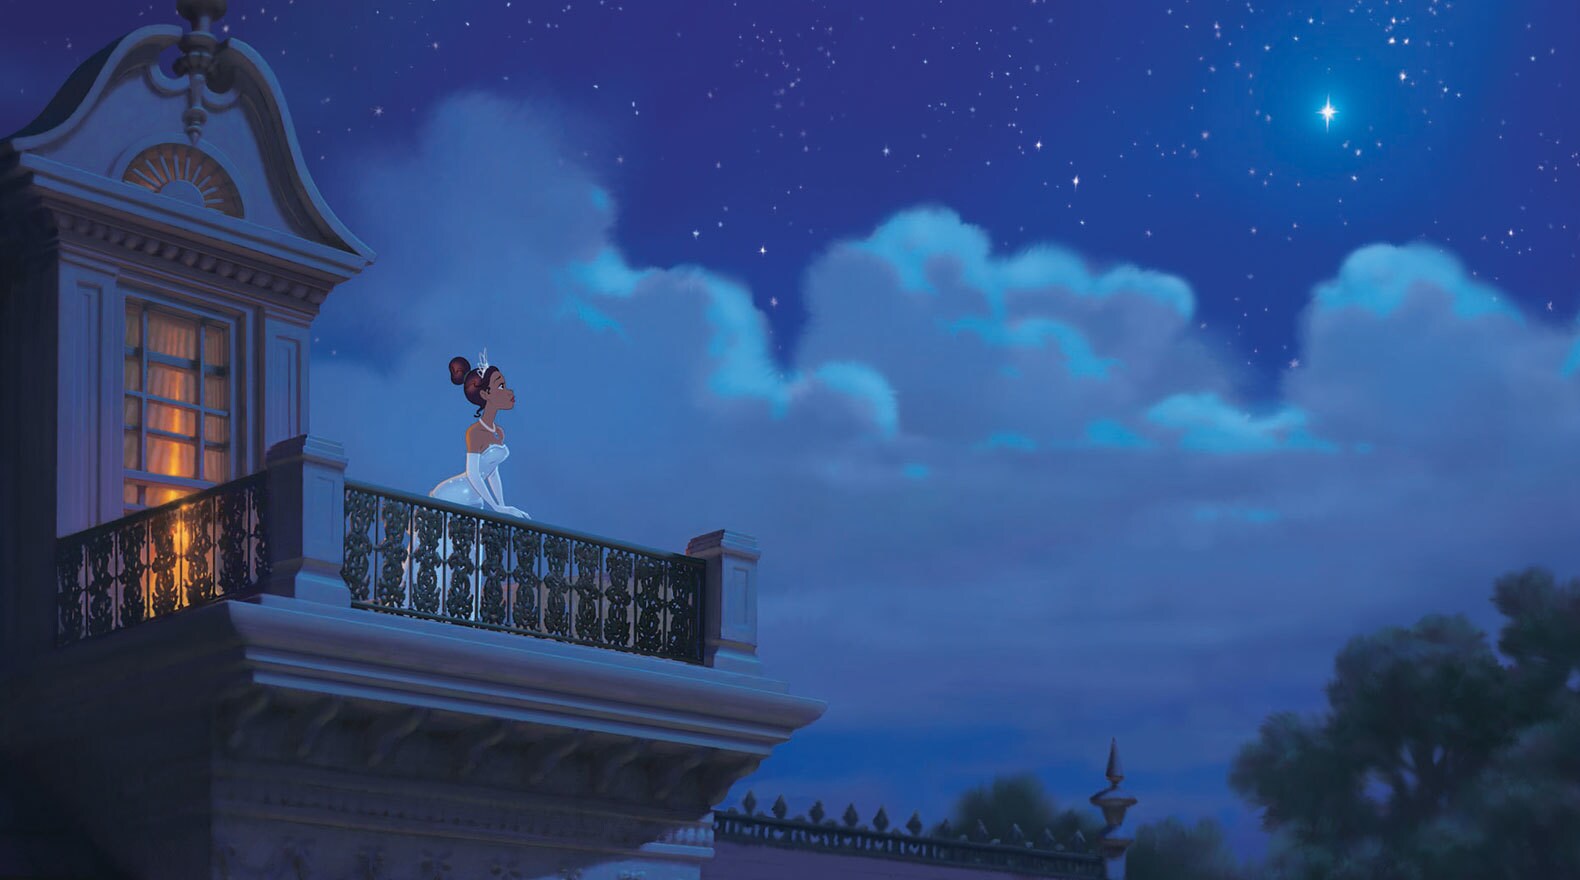 Tiana wishing on a star in The Princess and the Frog